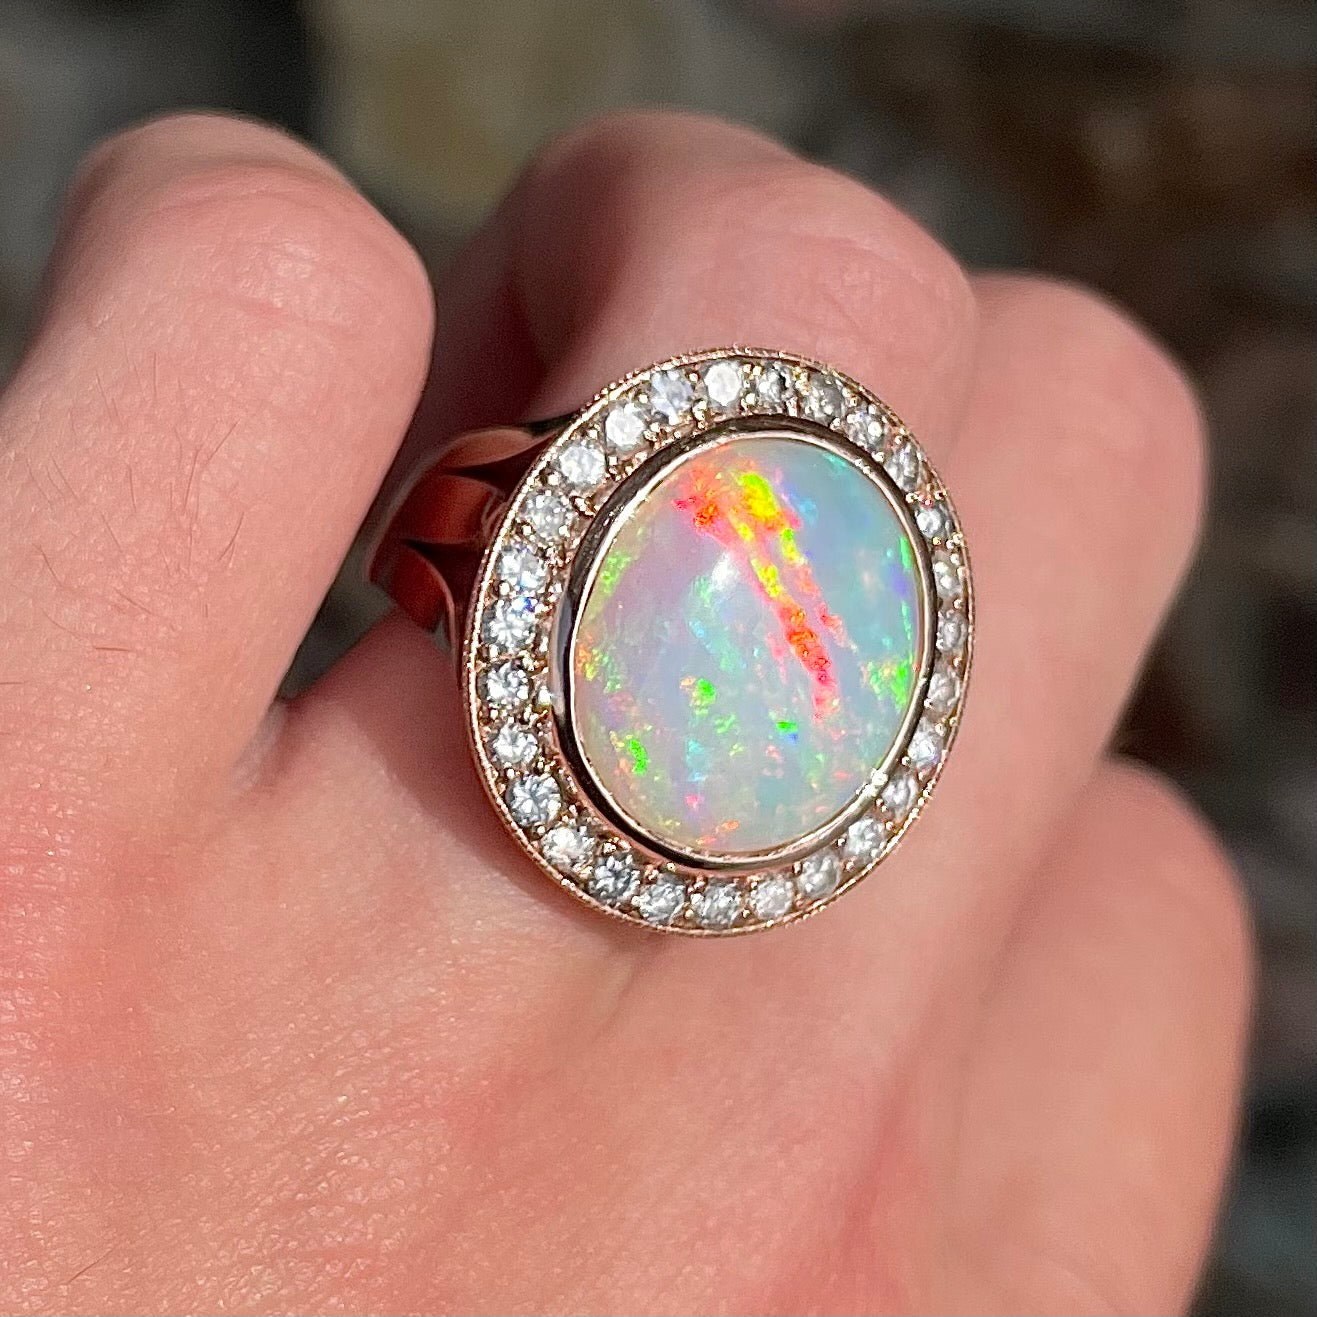 A large, Australian white crystal opal set in a rose gold and diamond halo ring.